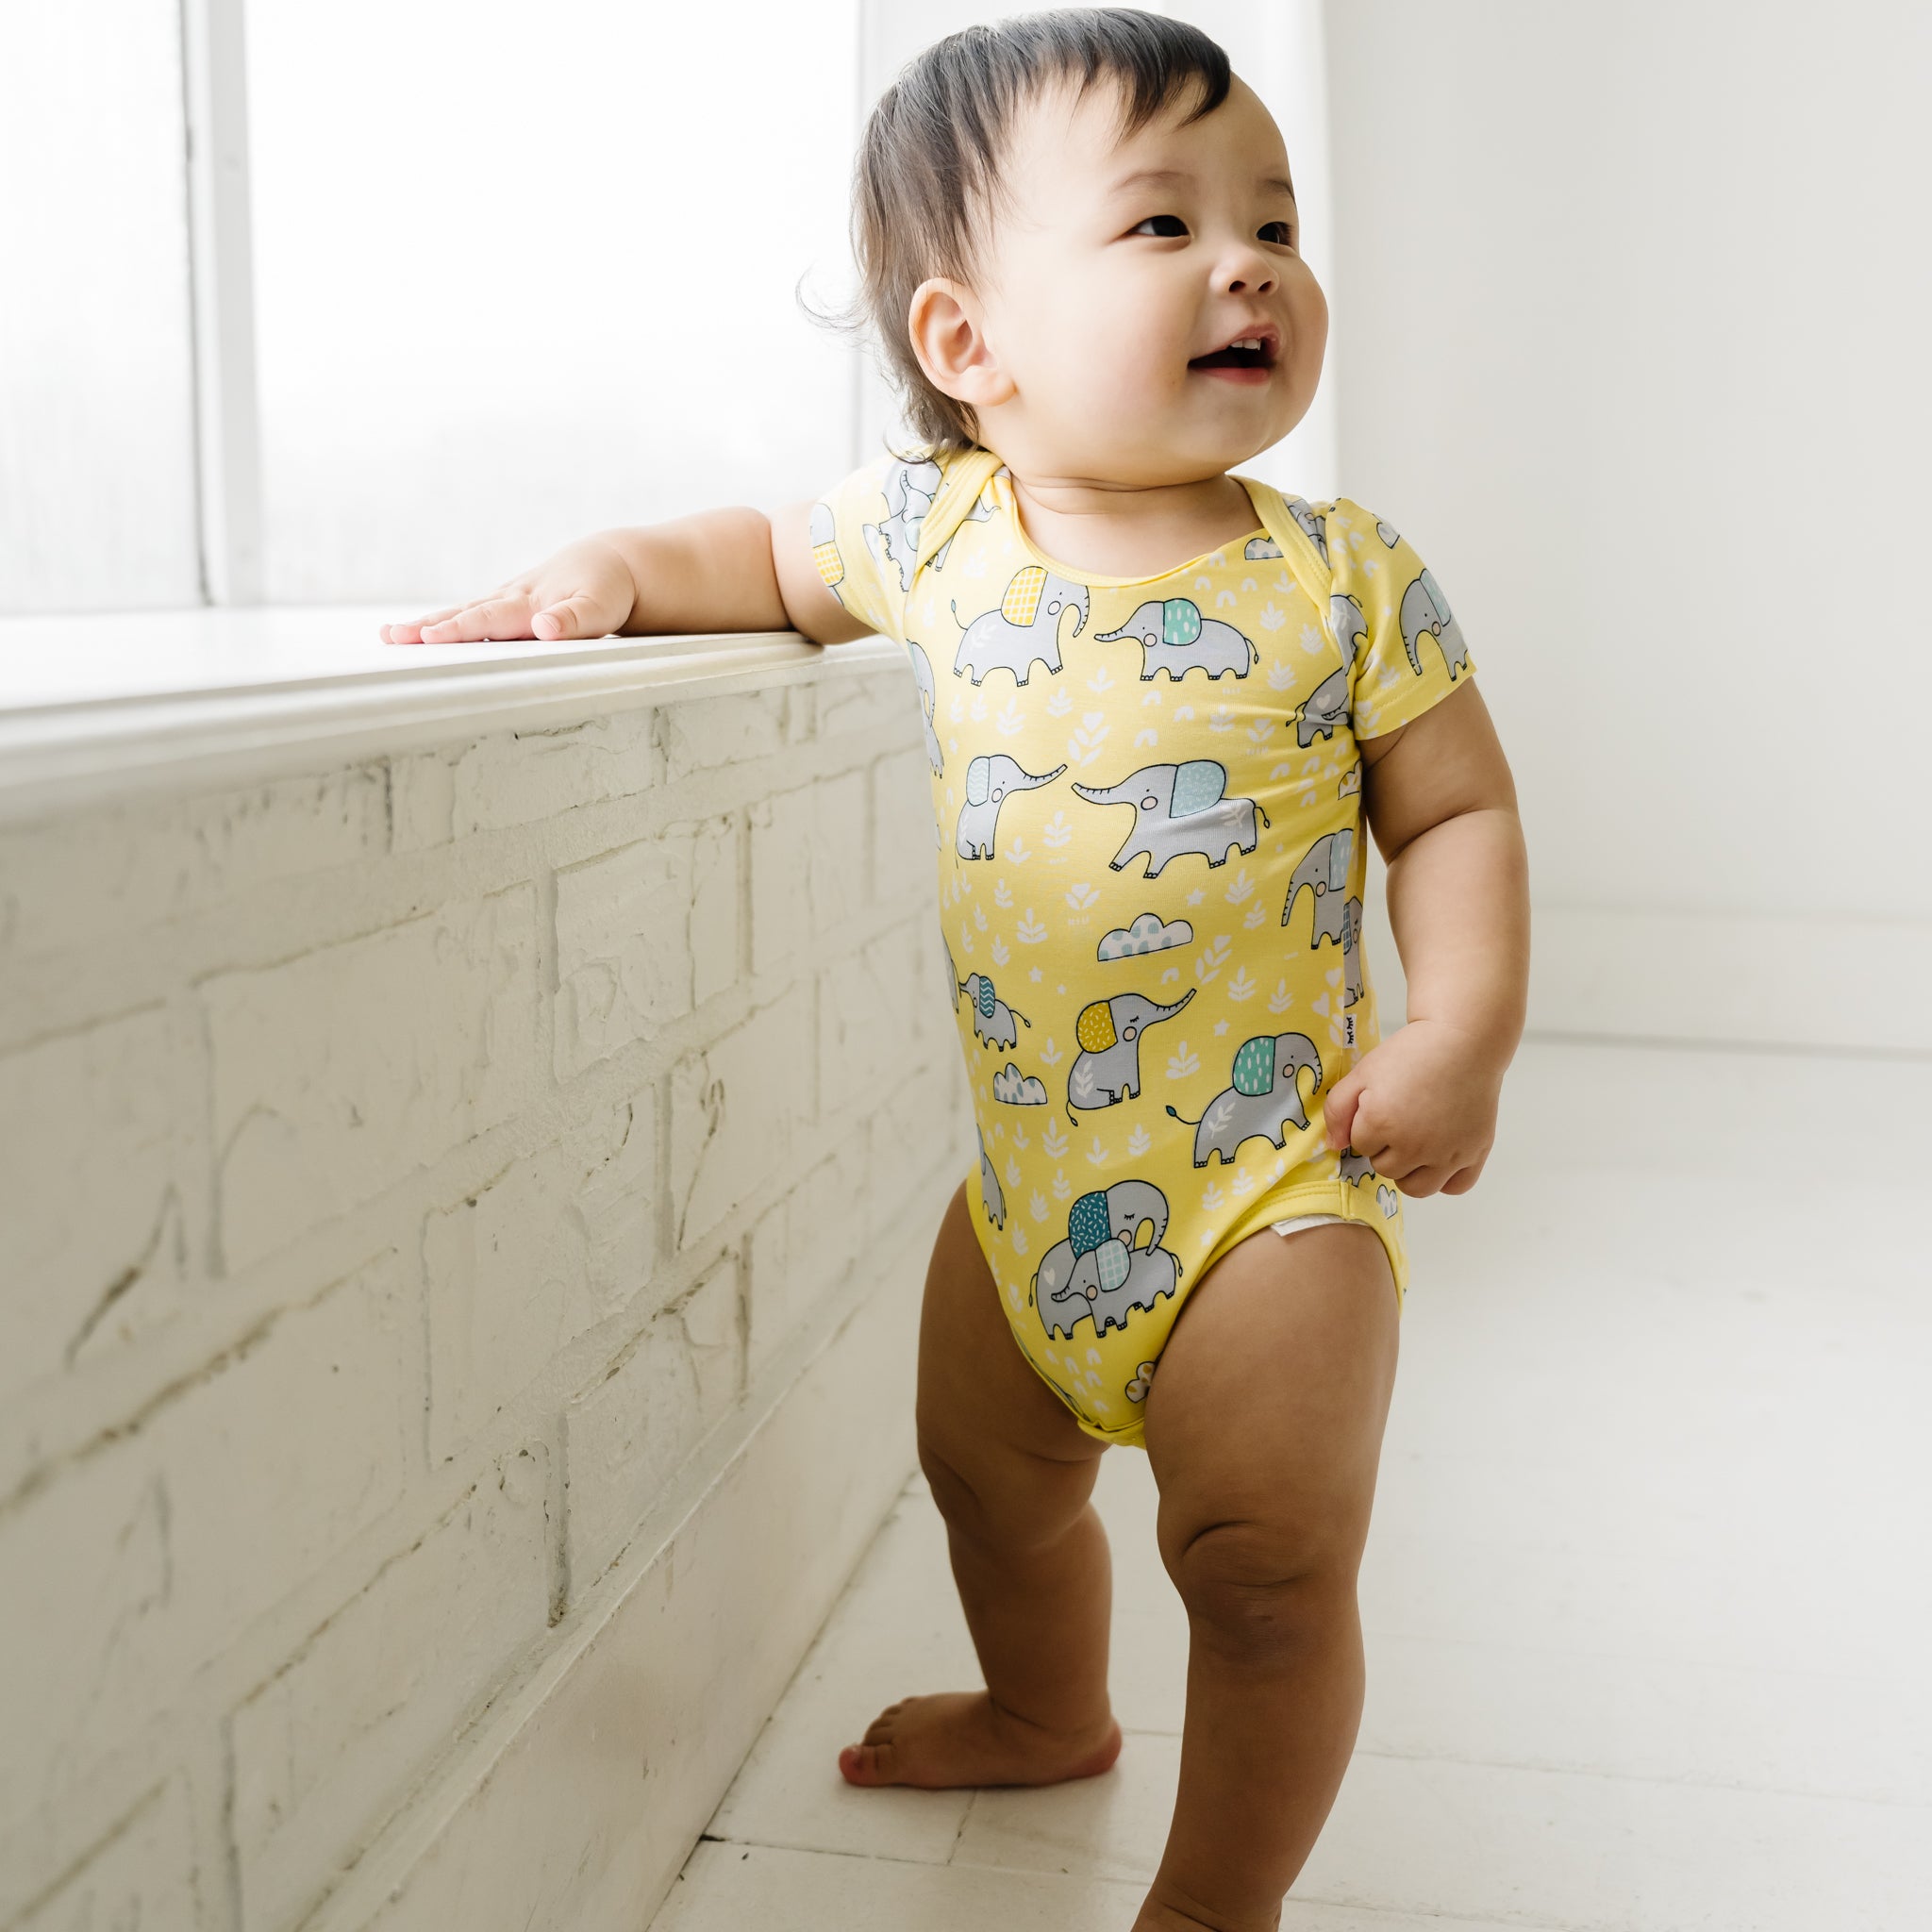 7 Ways to Keep Your Baby Cool This Summer